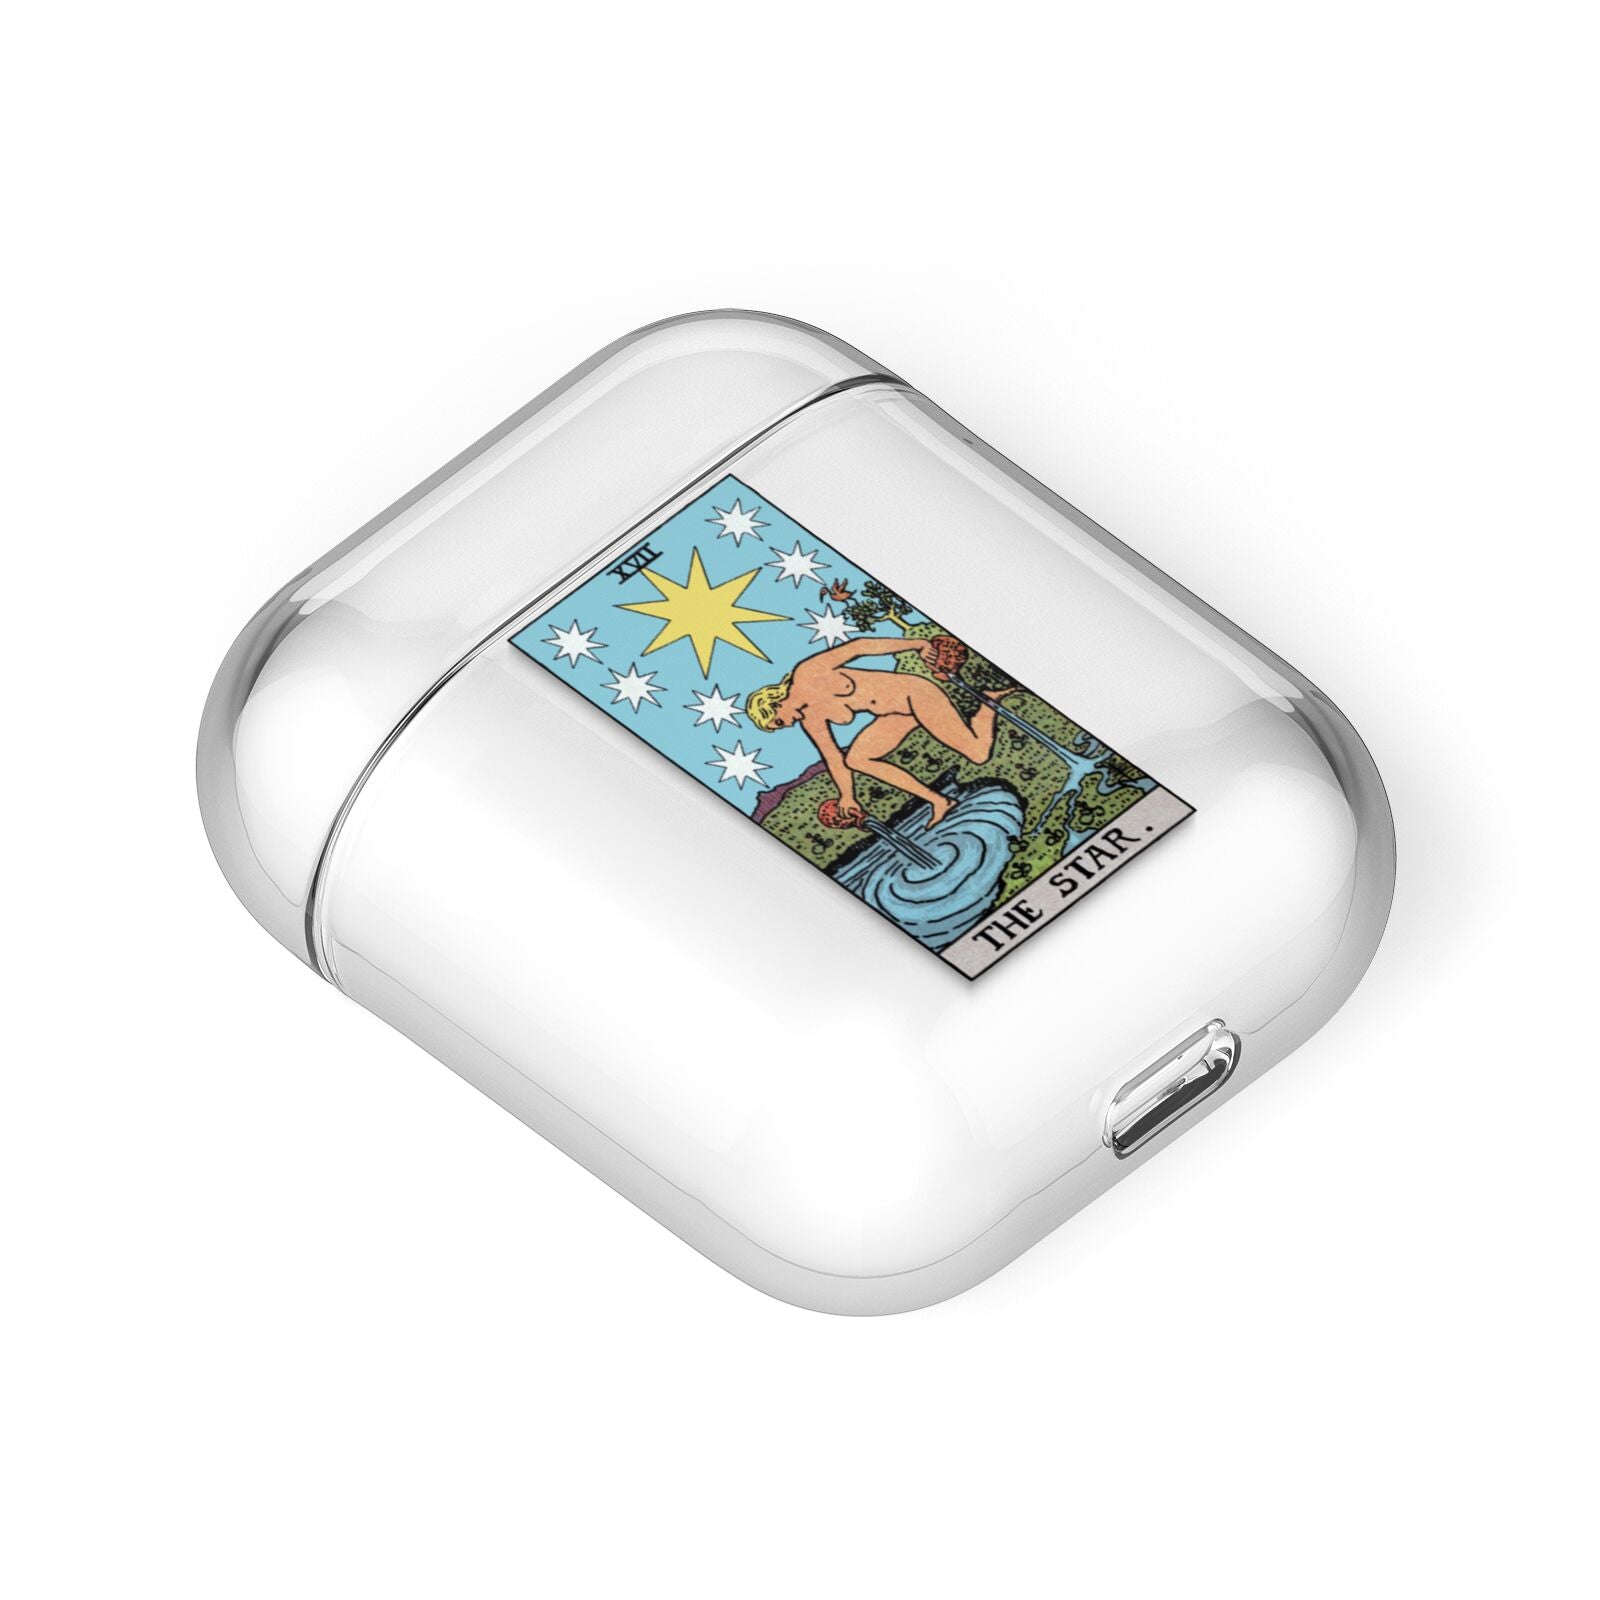 The Star Tarot Card AirPods Case Laid Flat